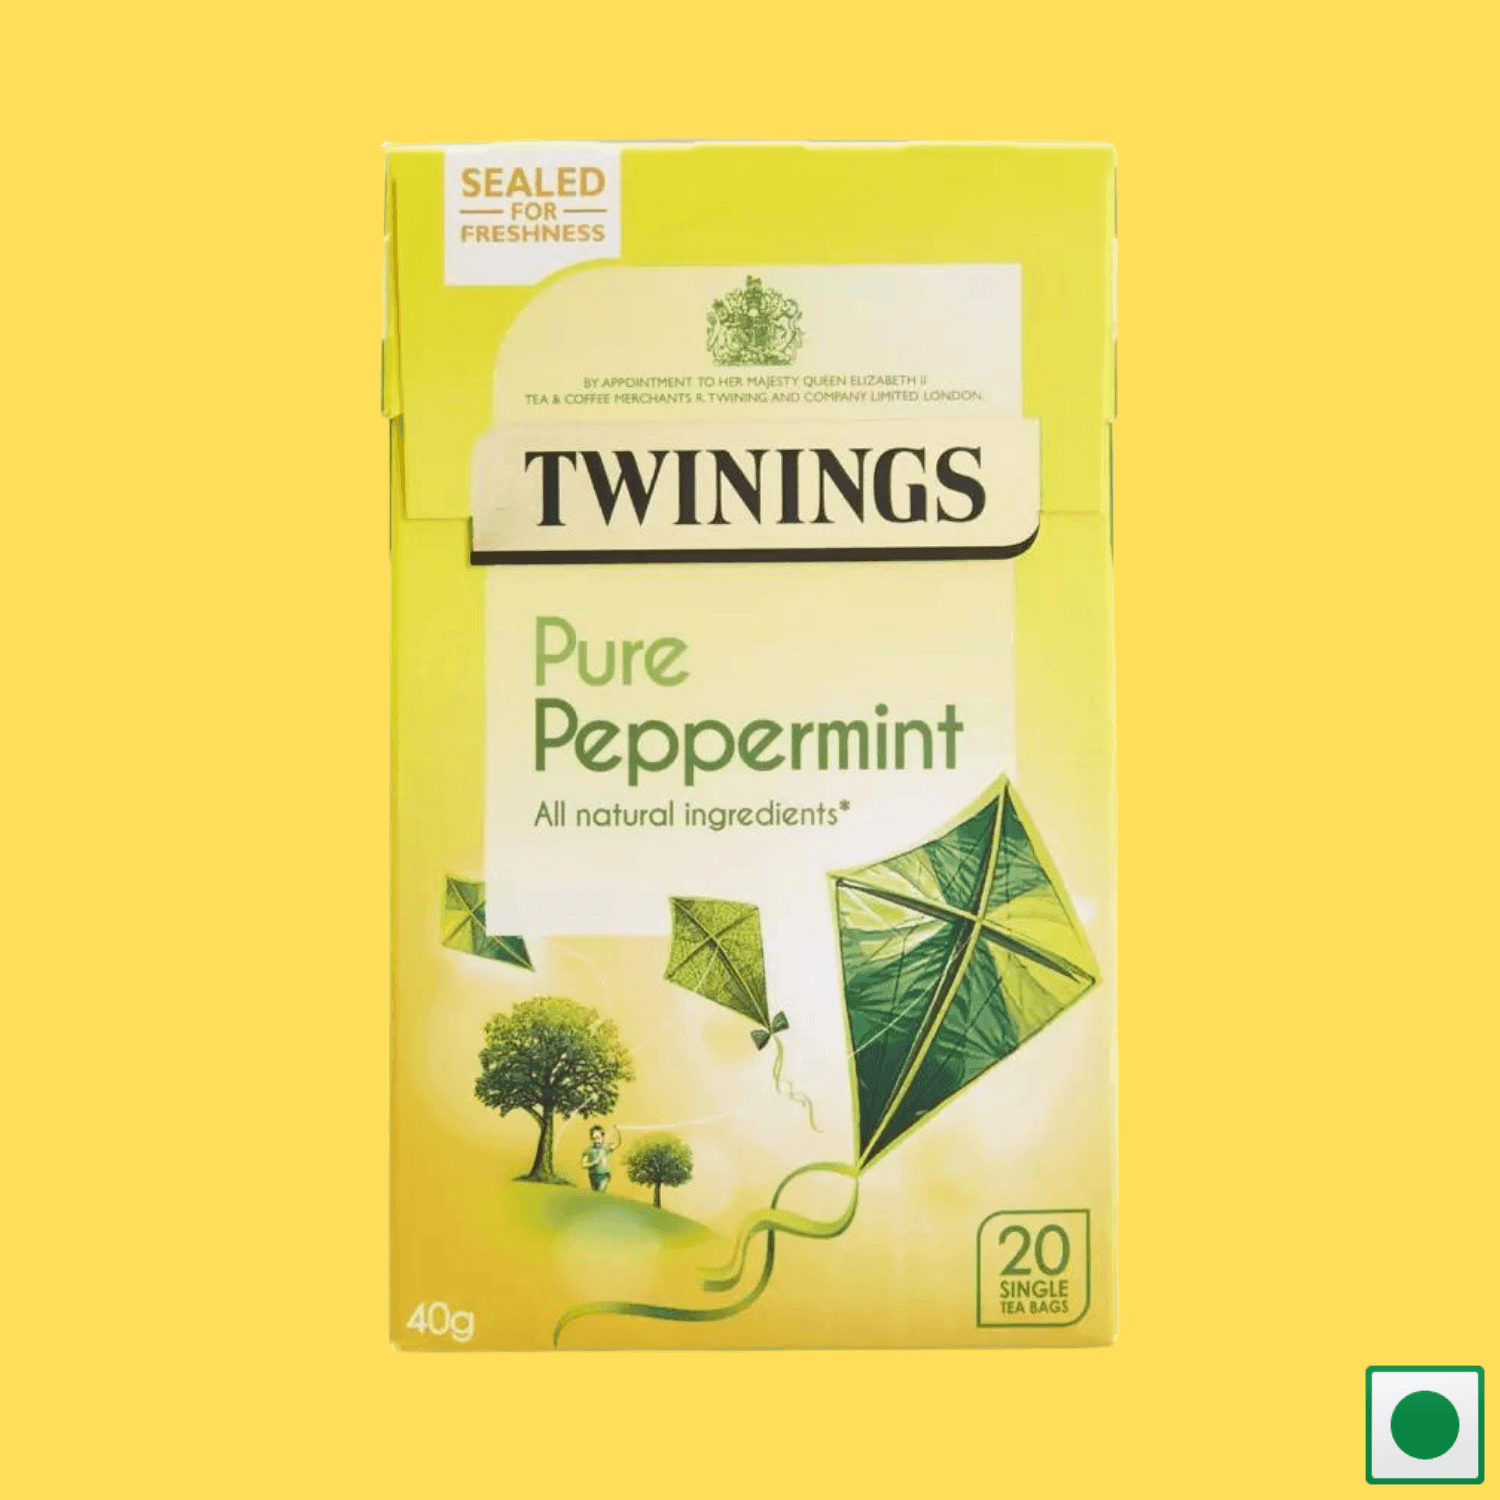 Twinings Pure Peppermint-20 Tea Bags, 40g (Imported) - Super 7 Mart